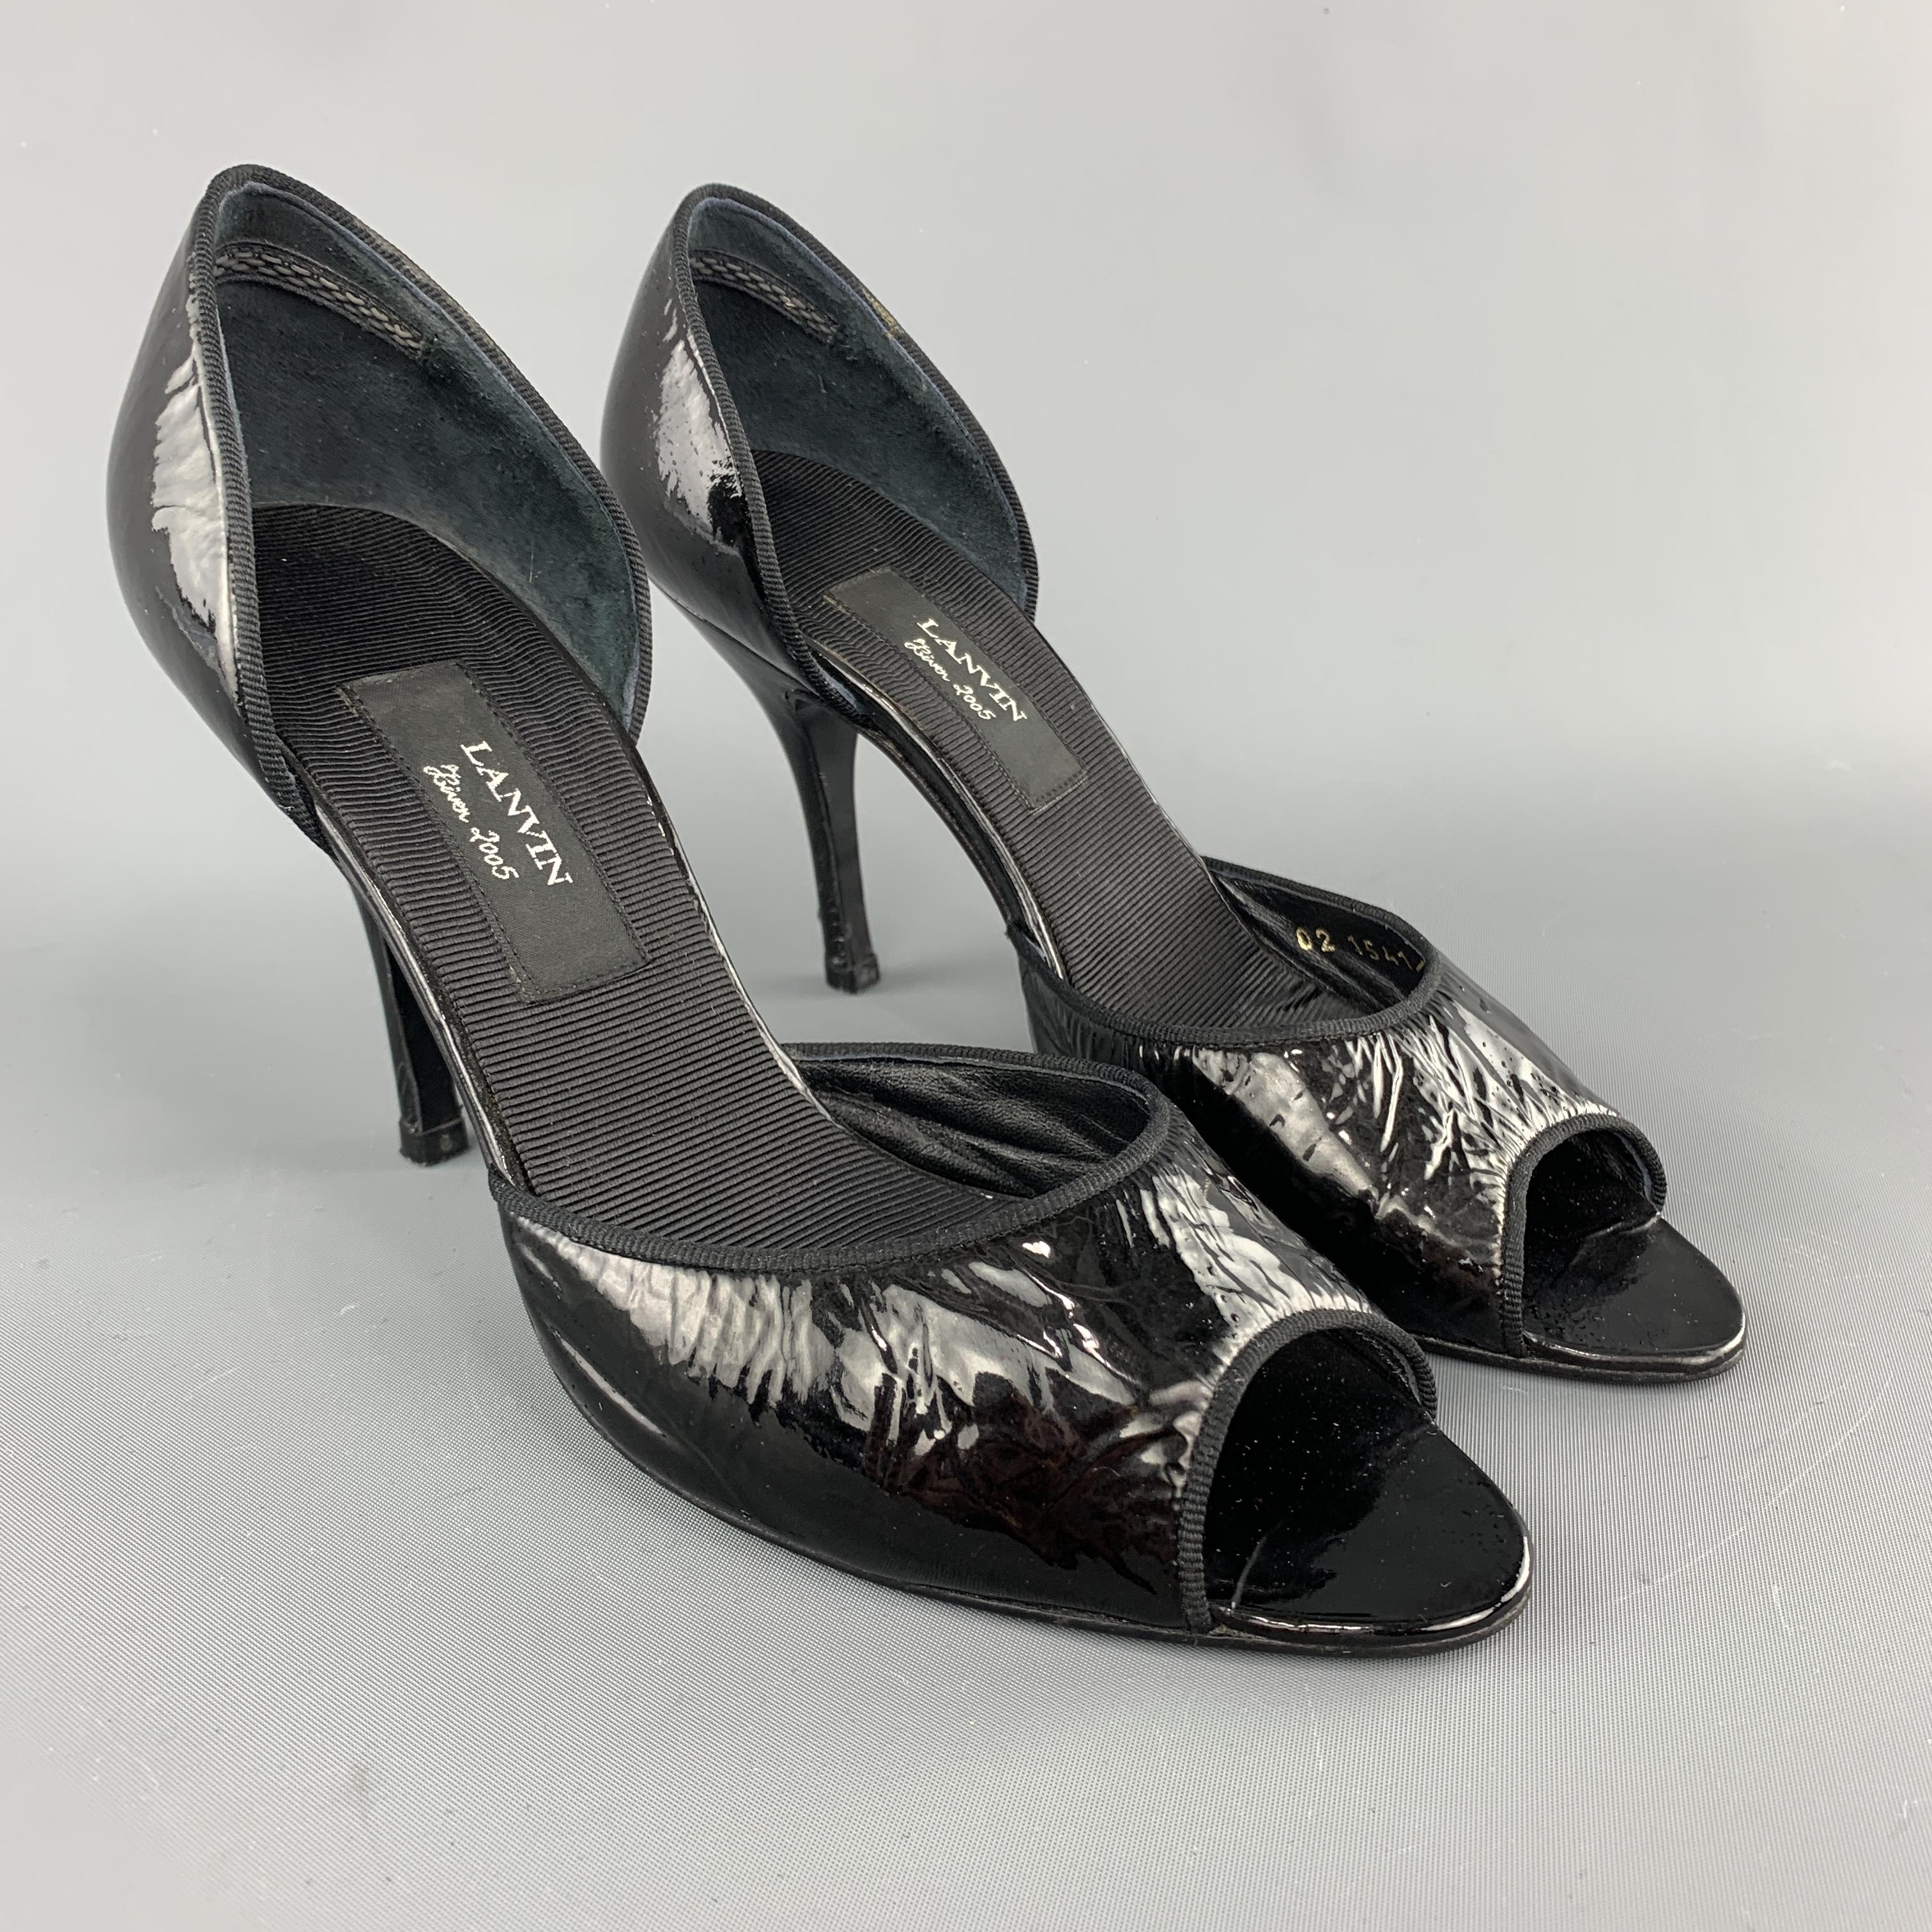 LANVIN D'orsay pumps come in black patent leather with ribbon piping and a peep toe. Made in Italy.

Good Pre-Owned Condition.
Marked: IT 37

Measurements:

Heel: 3.75 in.